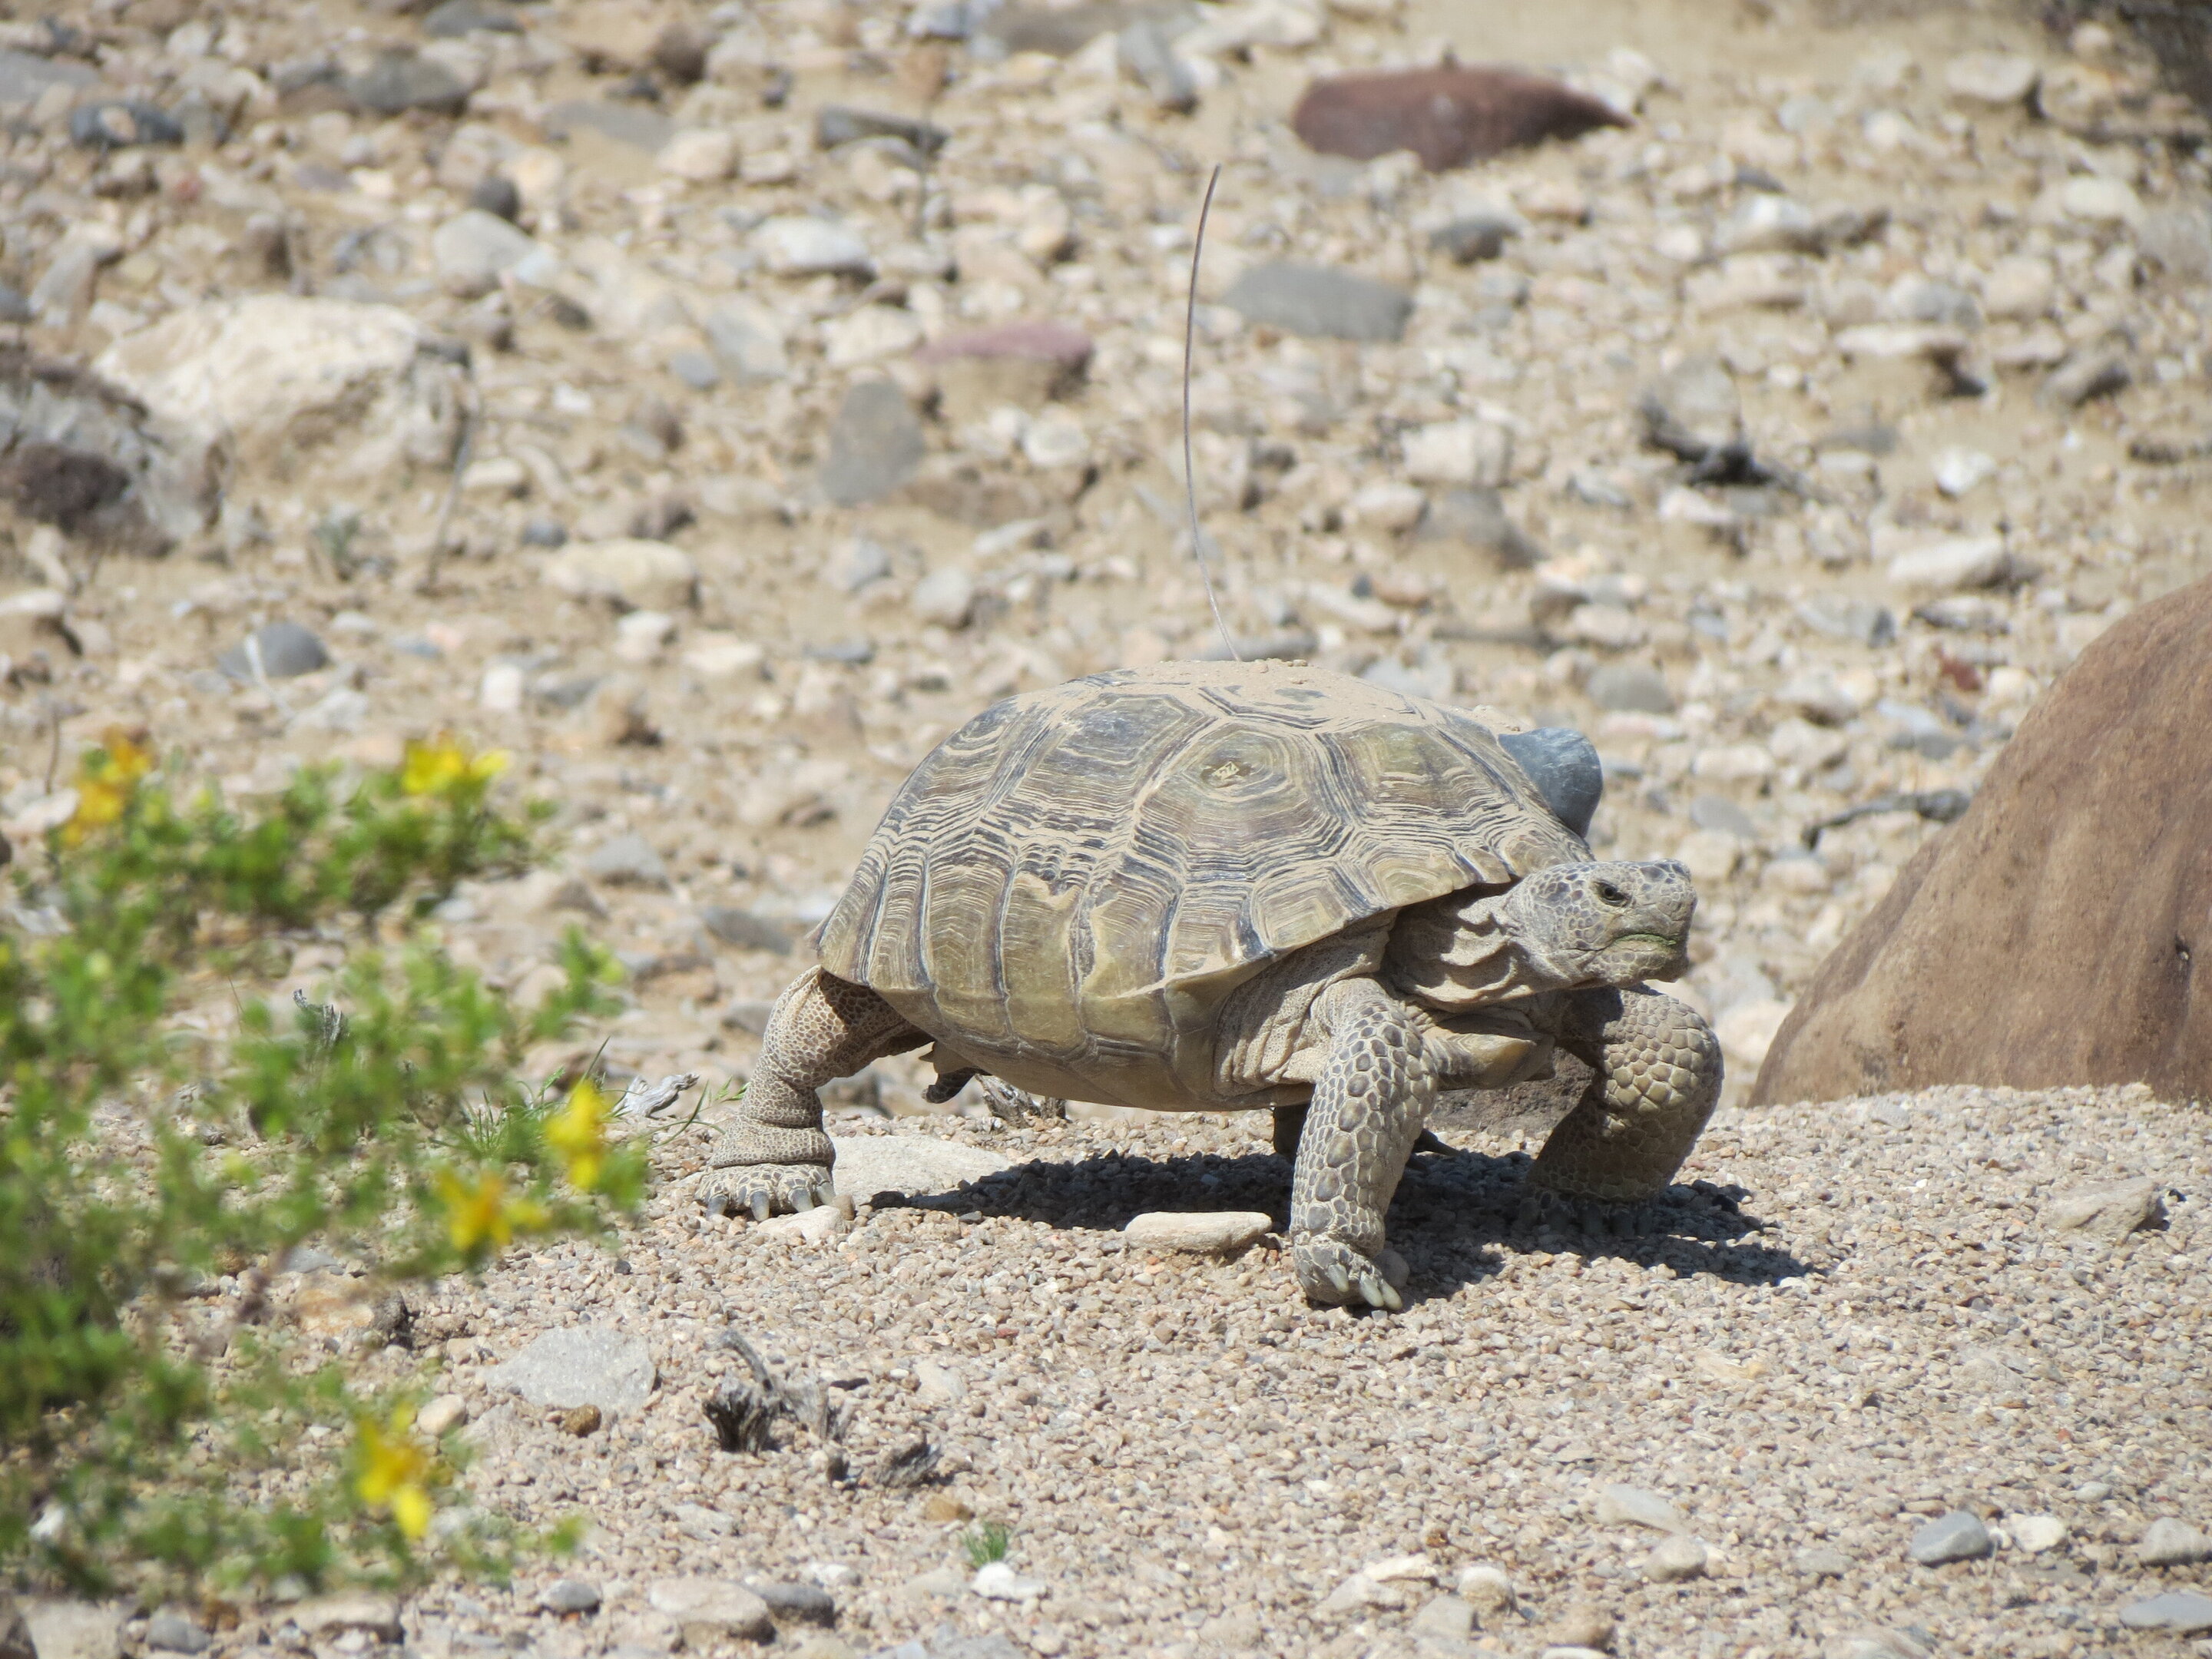 Study of threatened desert tortoises offers new conservation strategy